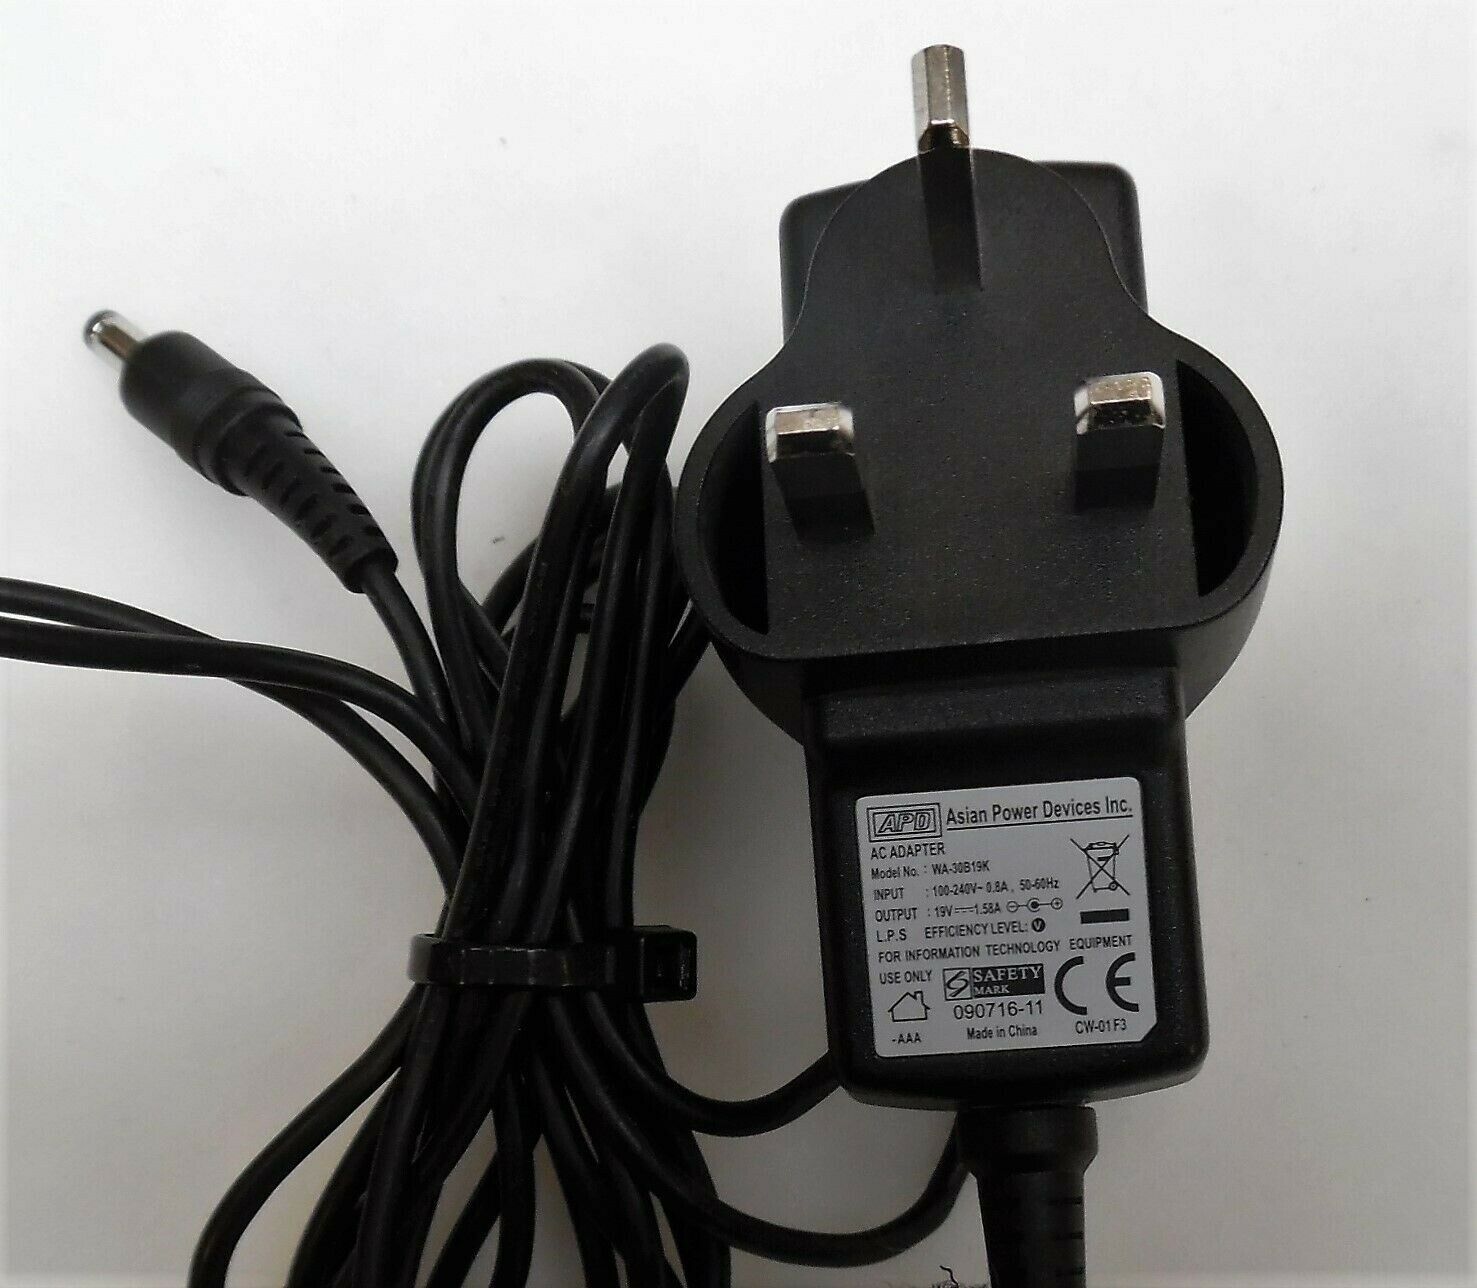 *Brand NEW*19V 1.58A AC DC Adapter Asian Power Device WA-30B19K Power Supply - Click Image to Close